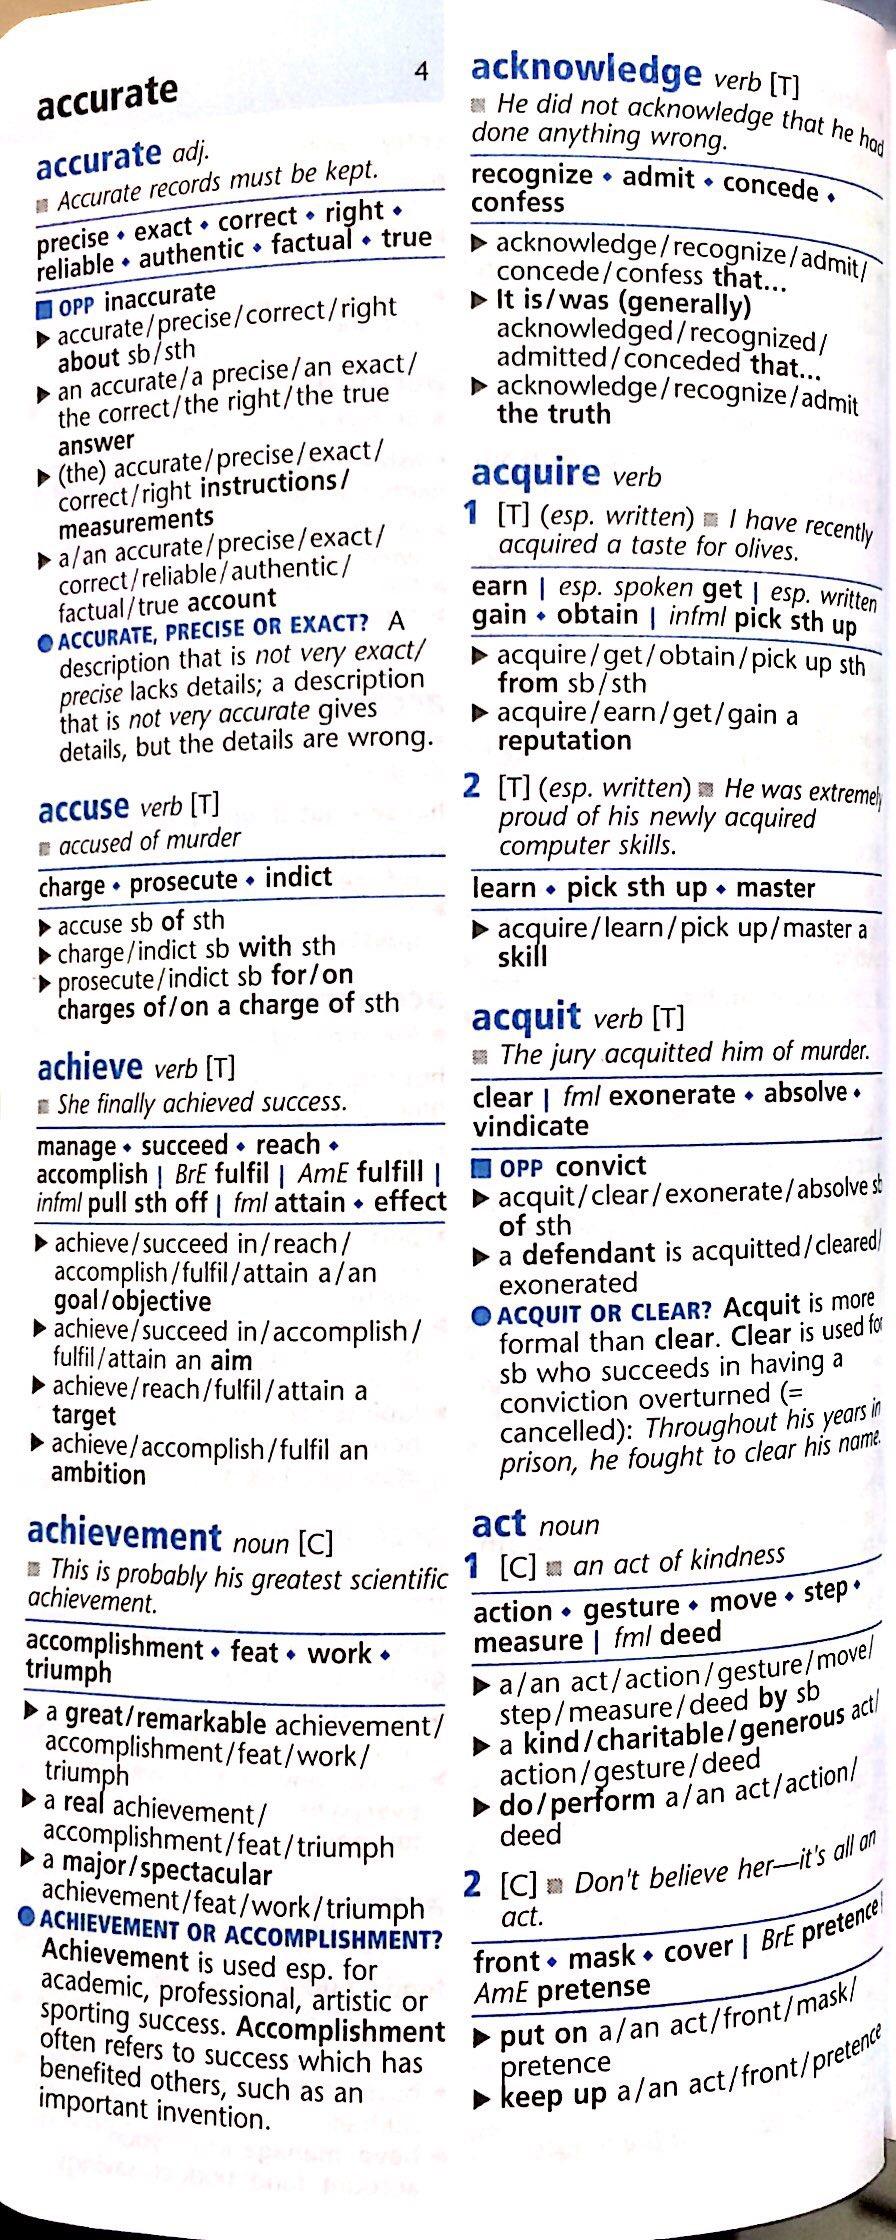 Oxford Learner 's Pocket Thesaurus : A Compact Dictionary of Synonyms and Opposites